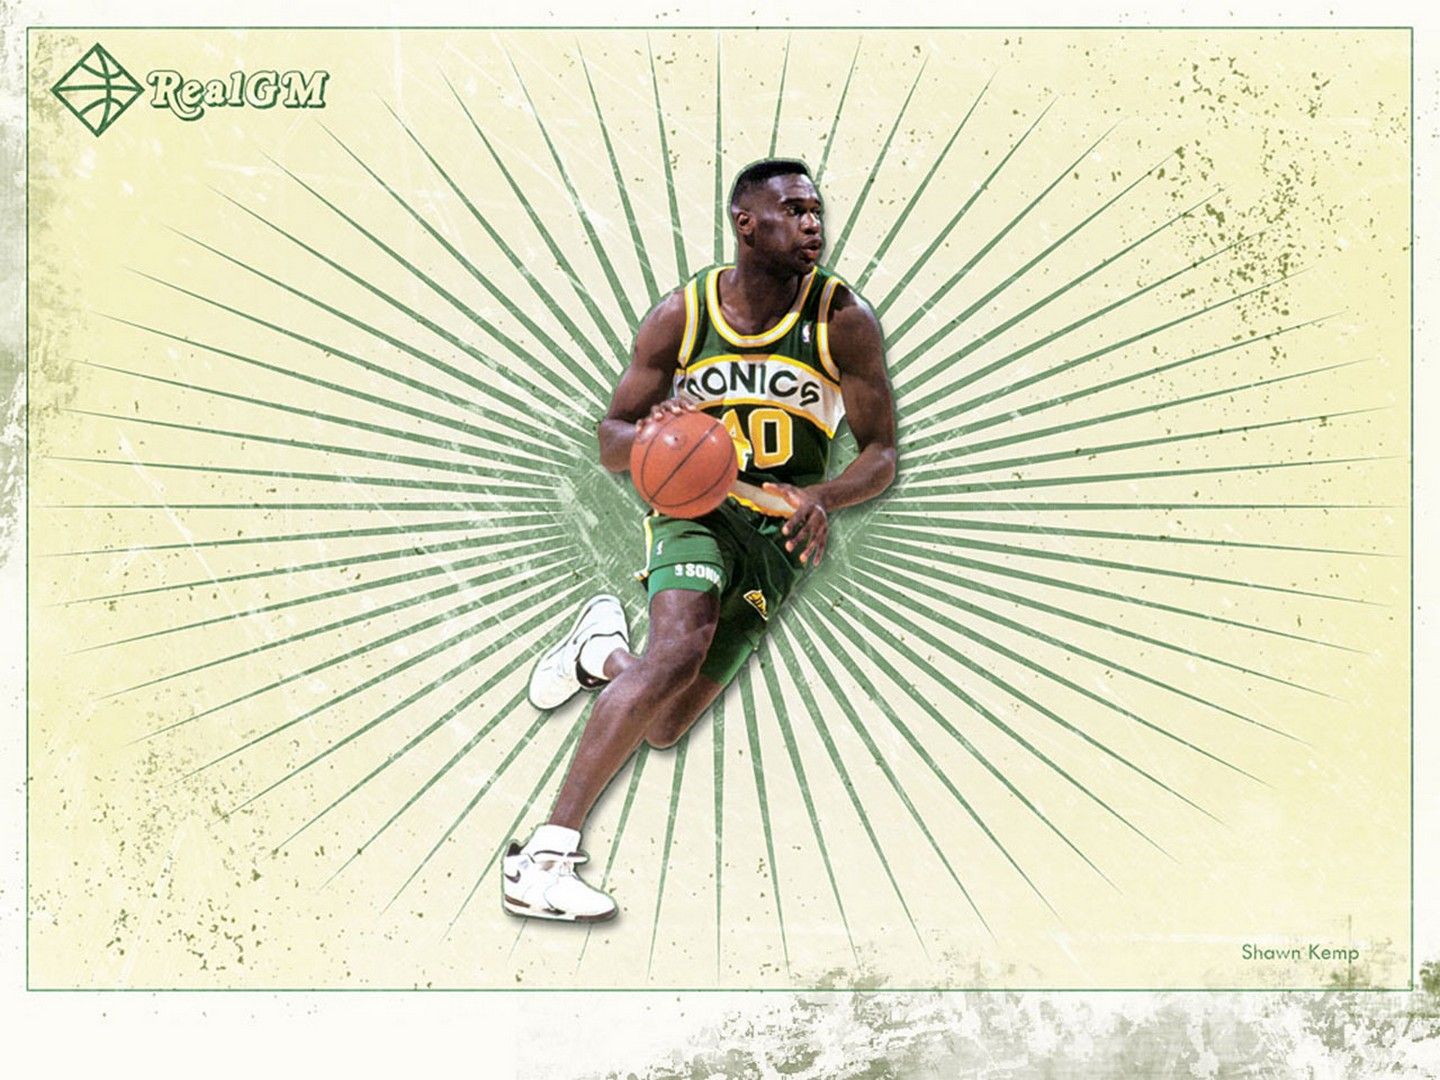 Shawn Kemp basketball wallpaper and picture